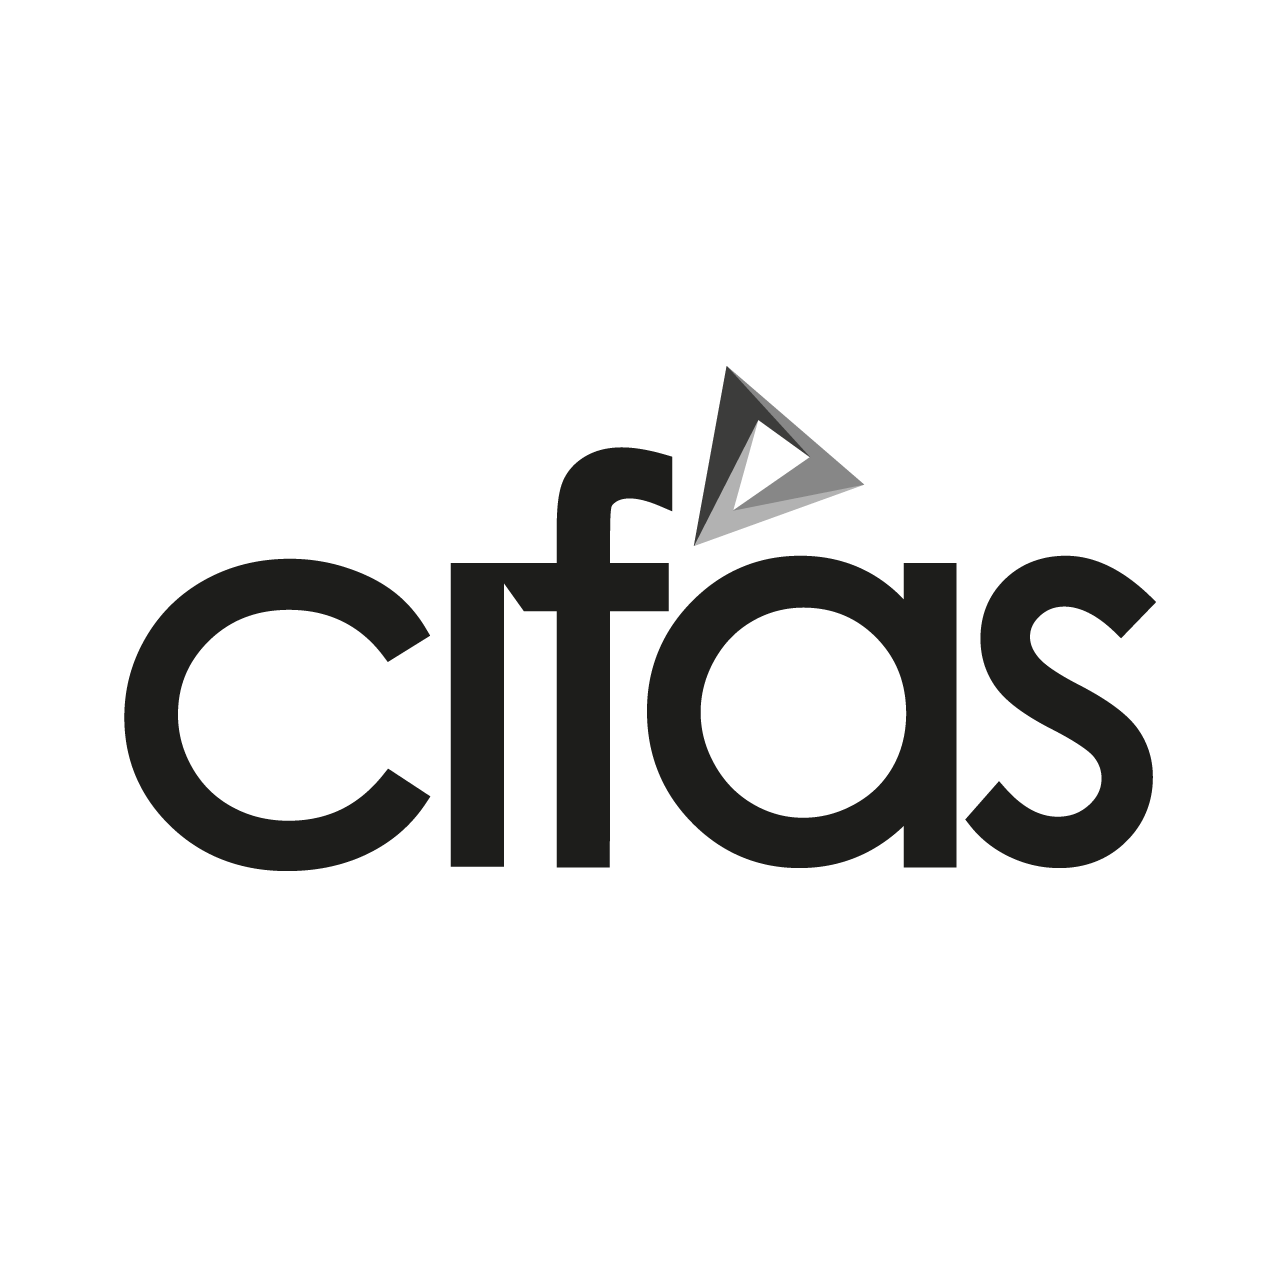 Cifas-logo.png